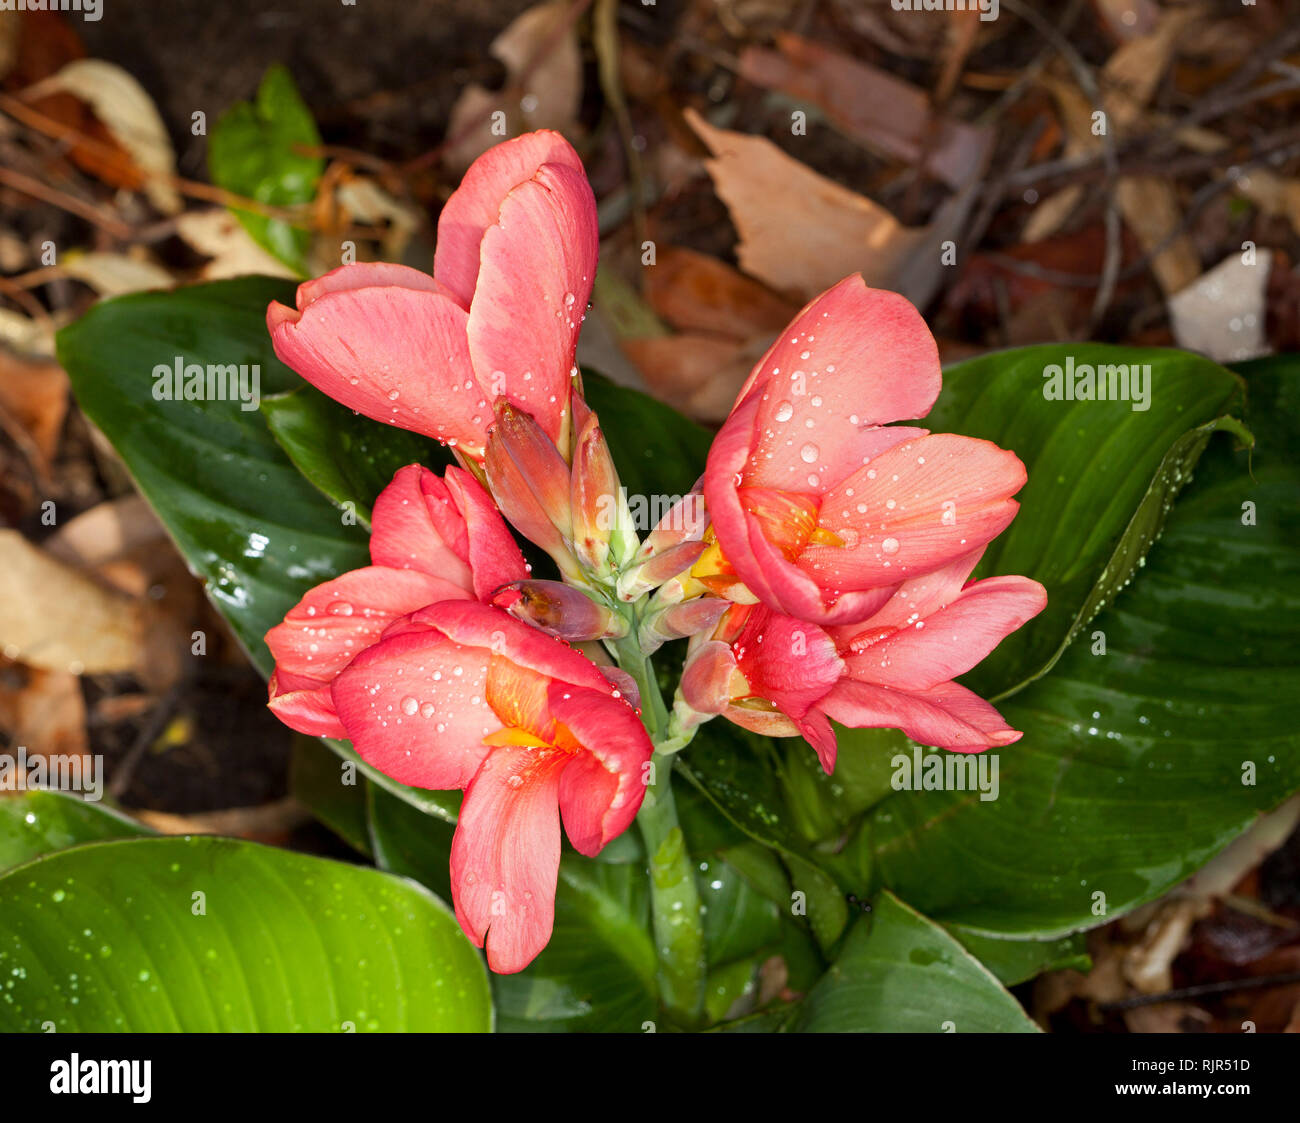 Cluster of beautiful salmon pink flowers of Canna x generalis 'Cannova Rose' against background of bright green leaves in Australia Stock Photo